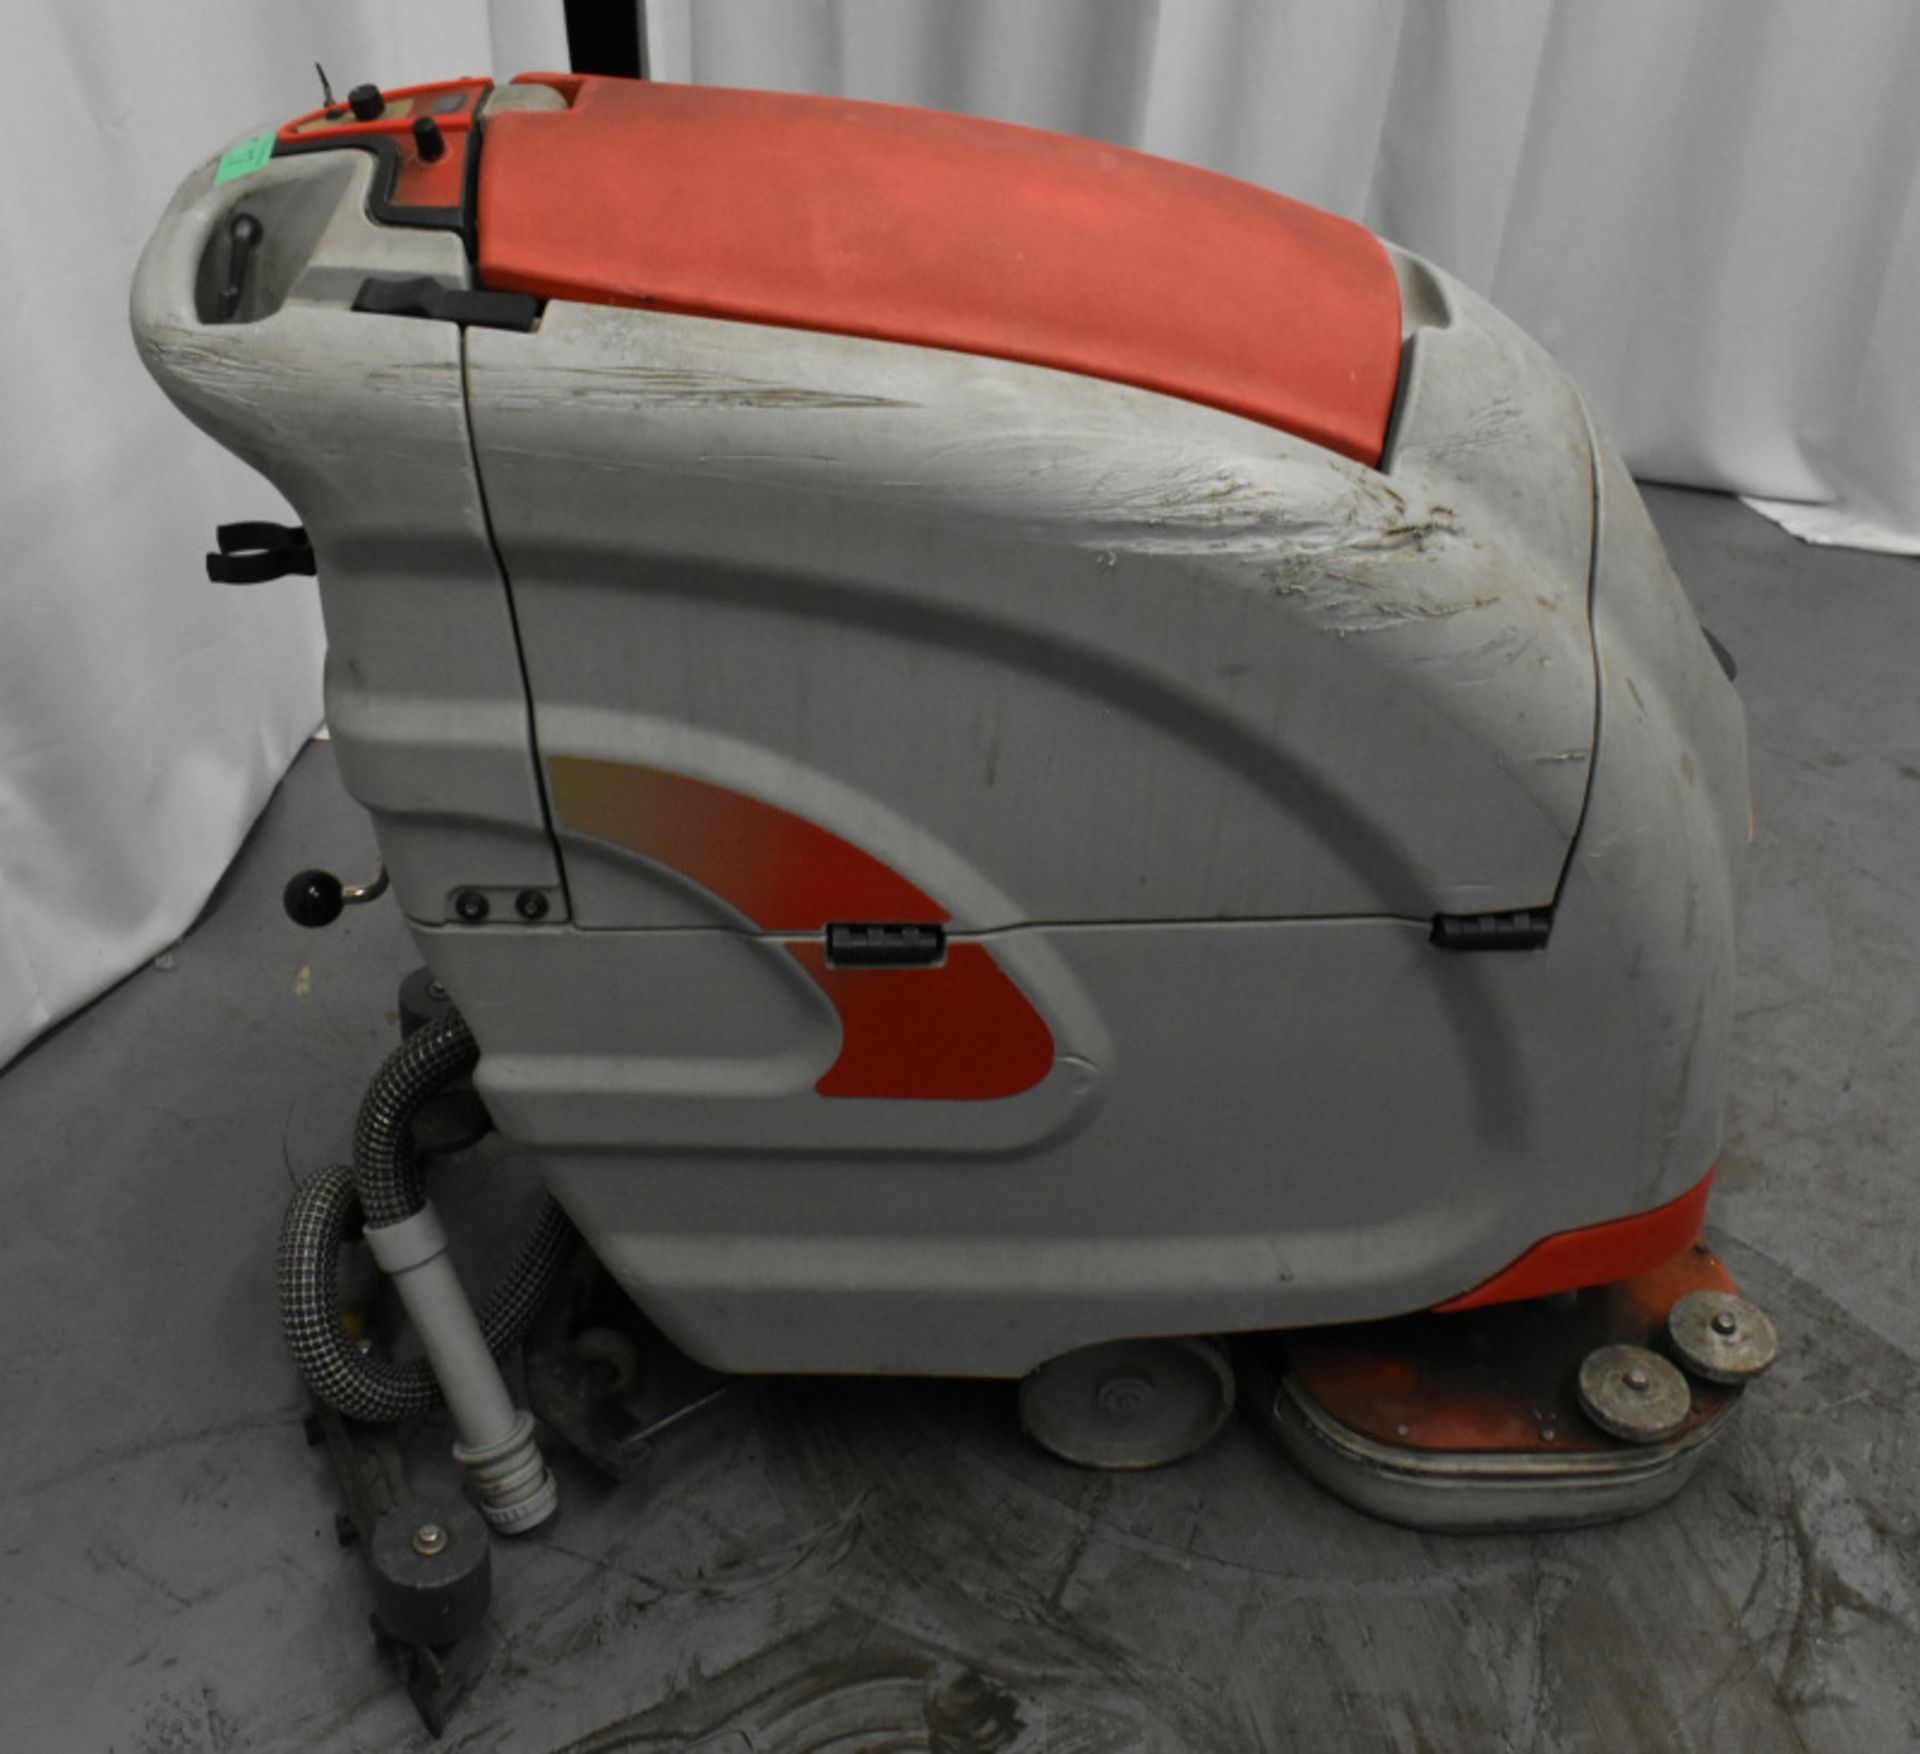 Comac Abila 52Bt Floor Scrubber Dryer, comes with key, starts and runs- 841 hours - Image 4 of 7